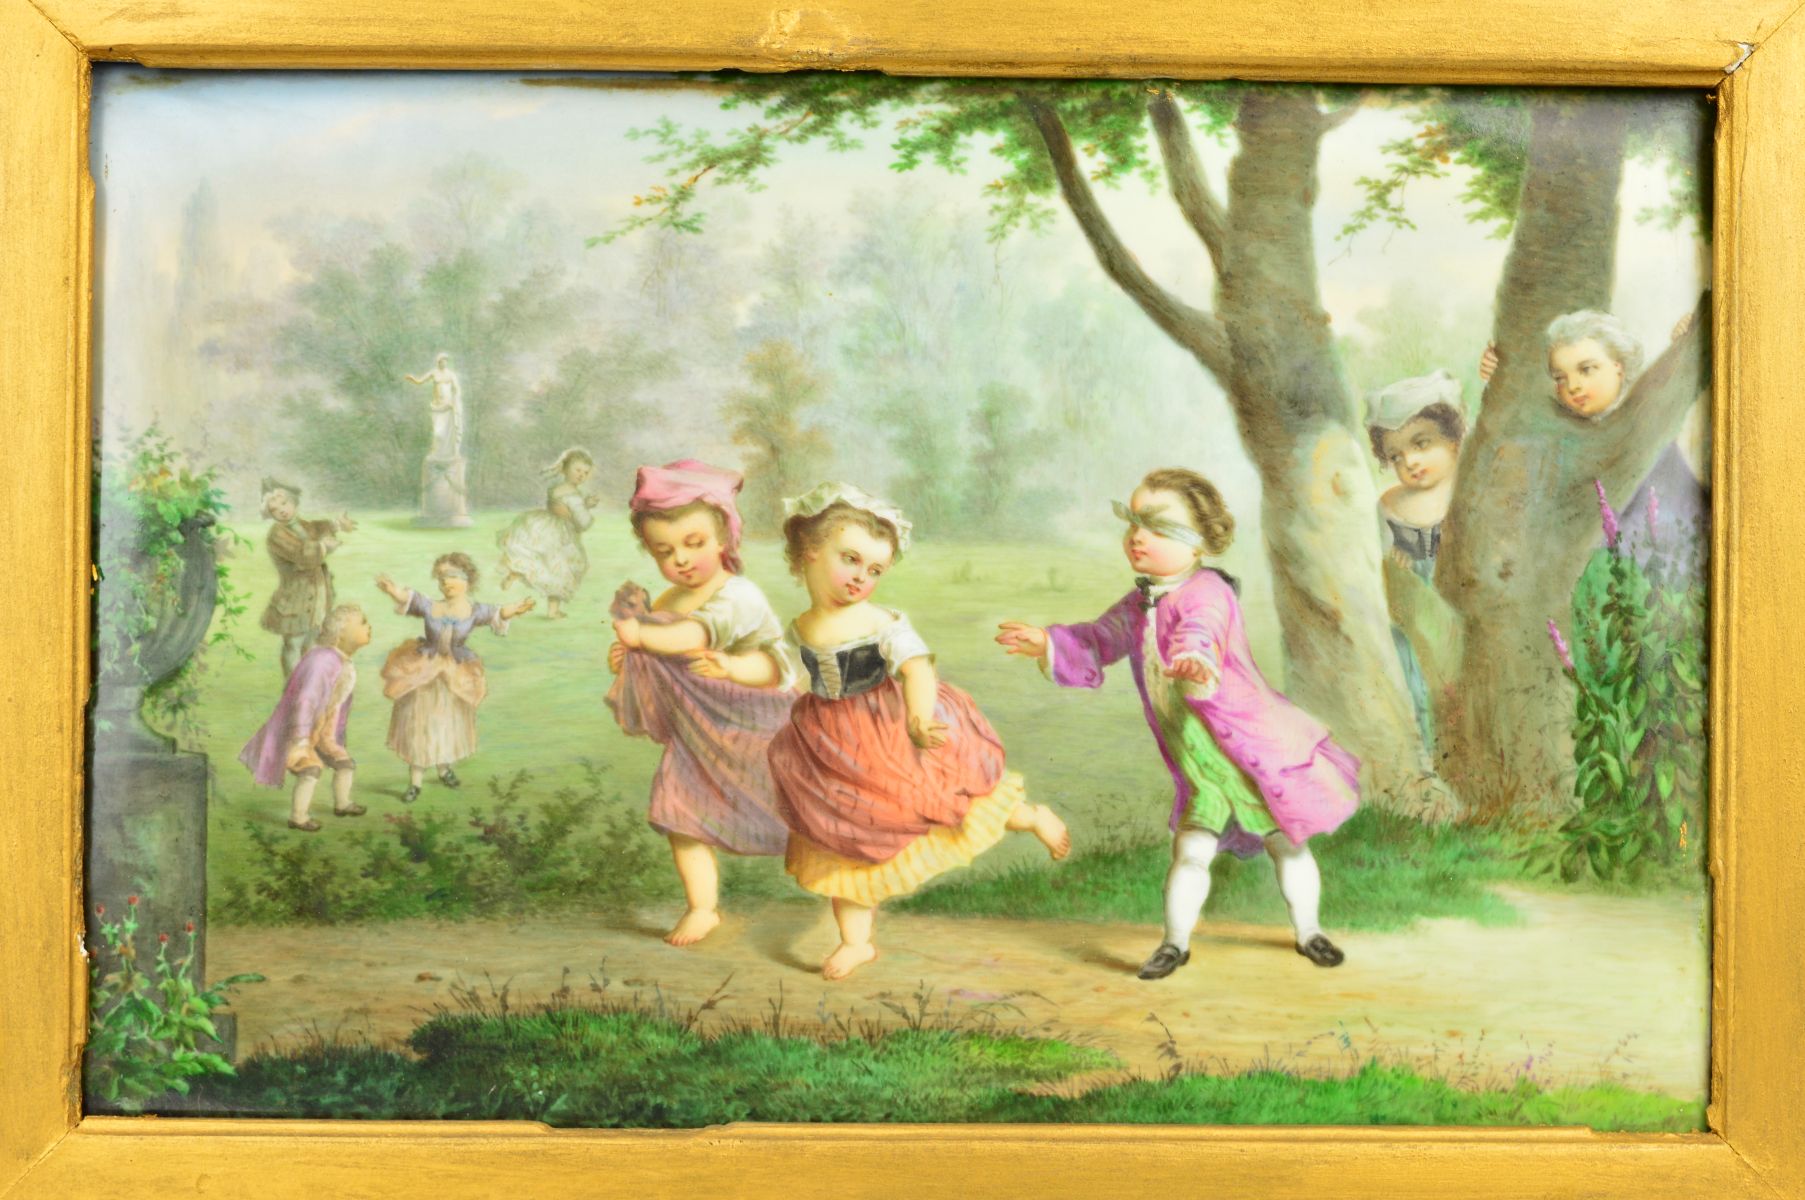 A 19TH CENTURY RECTANGULAR PORCELAIN PLAQUE, painted with children in mid/late 18th Century - Image 2 of 5